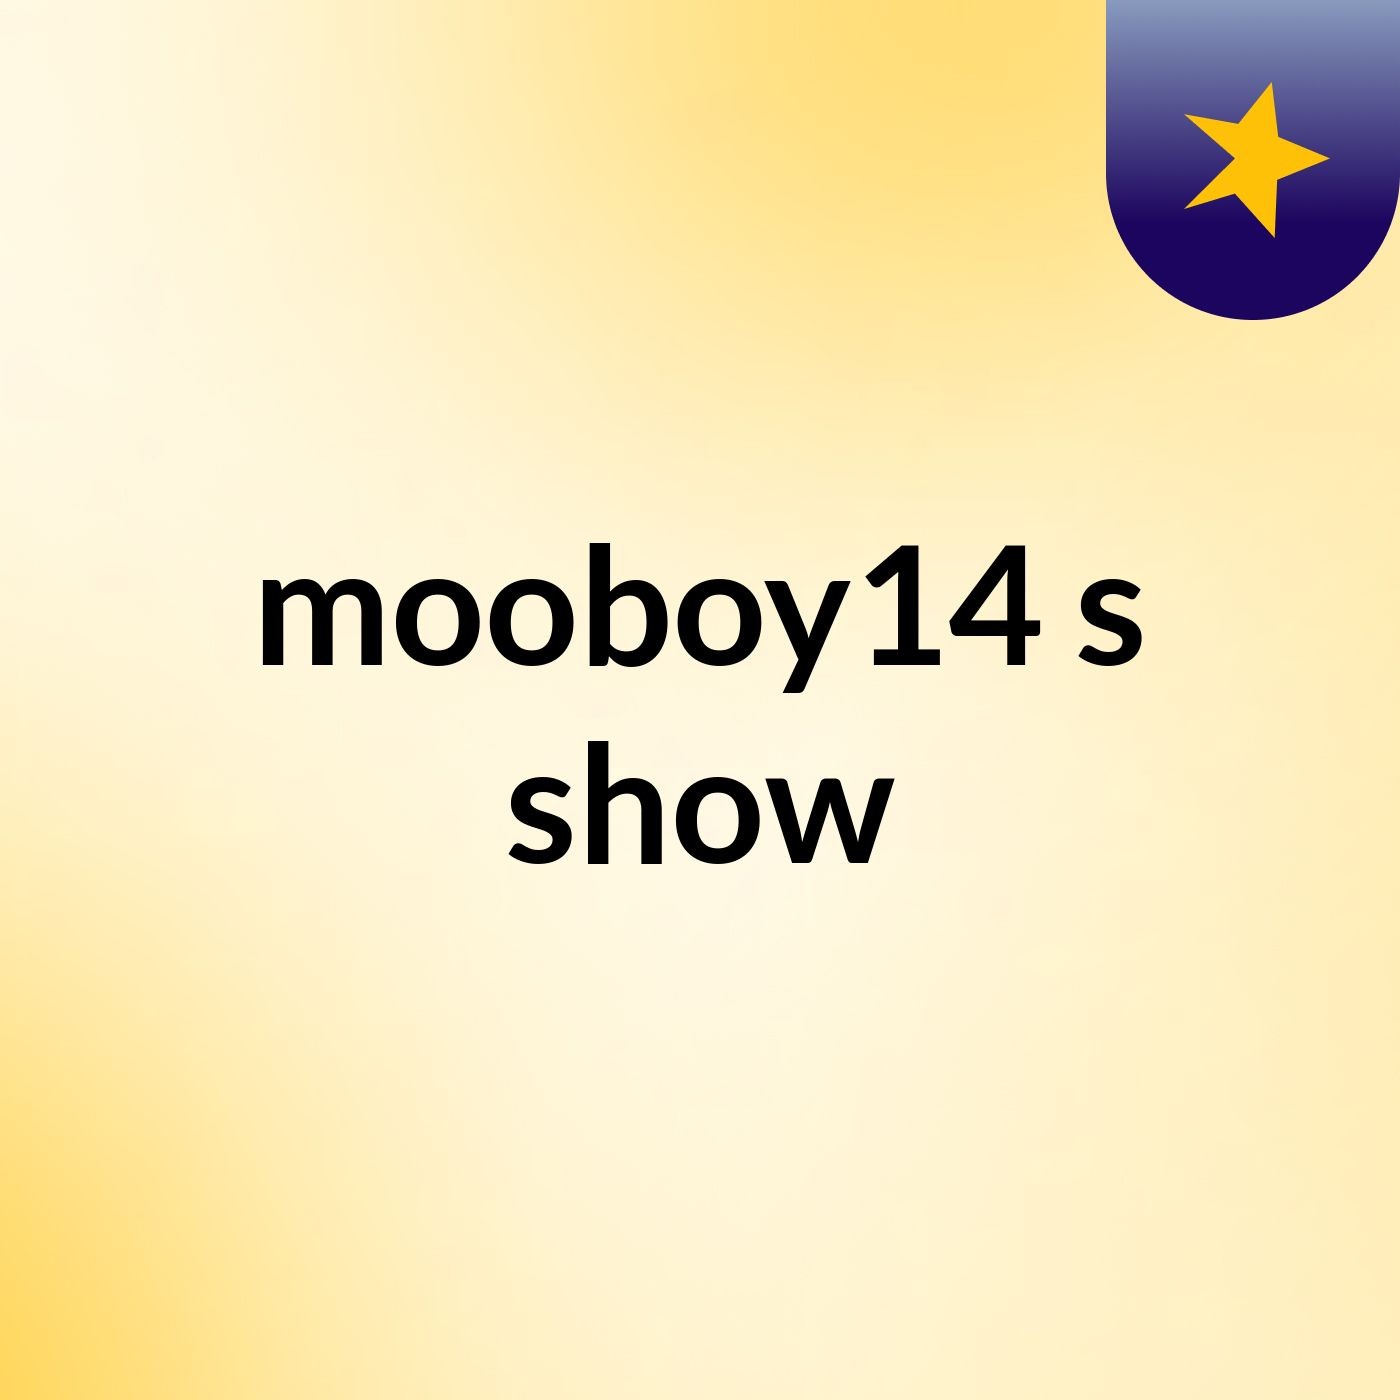 mooboy14's show